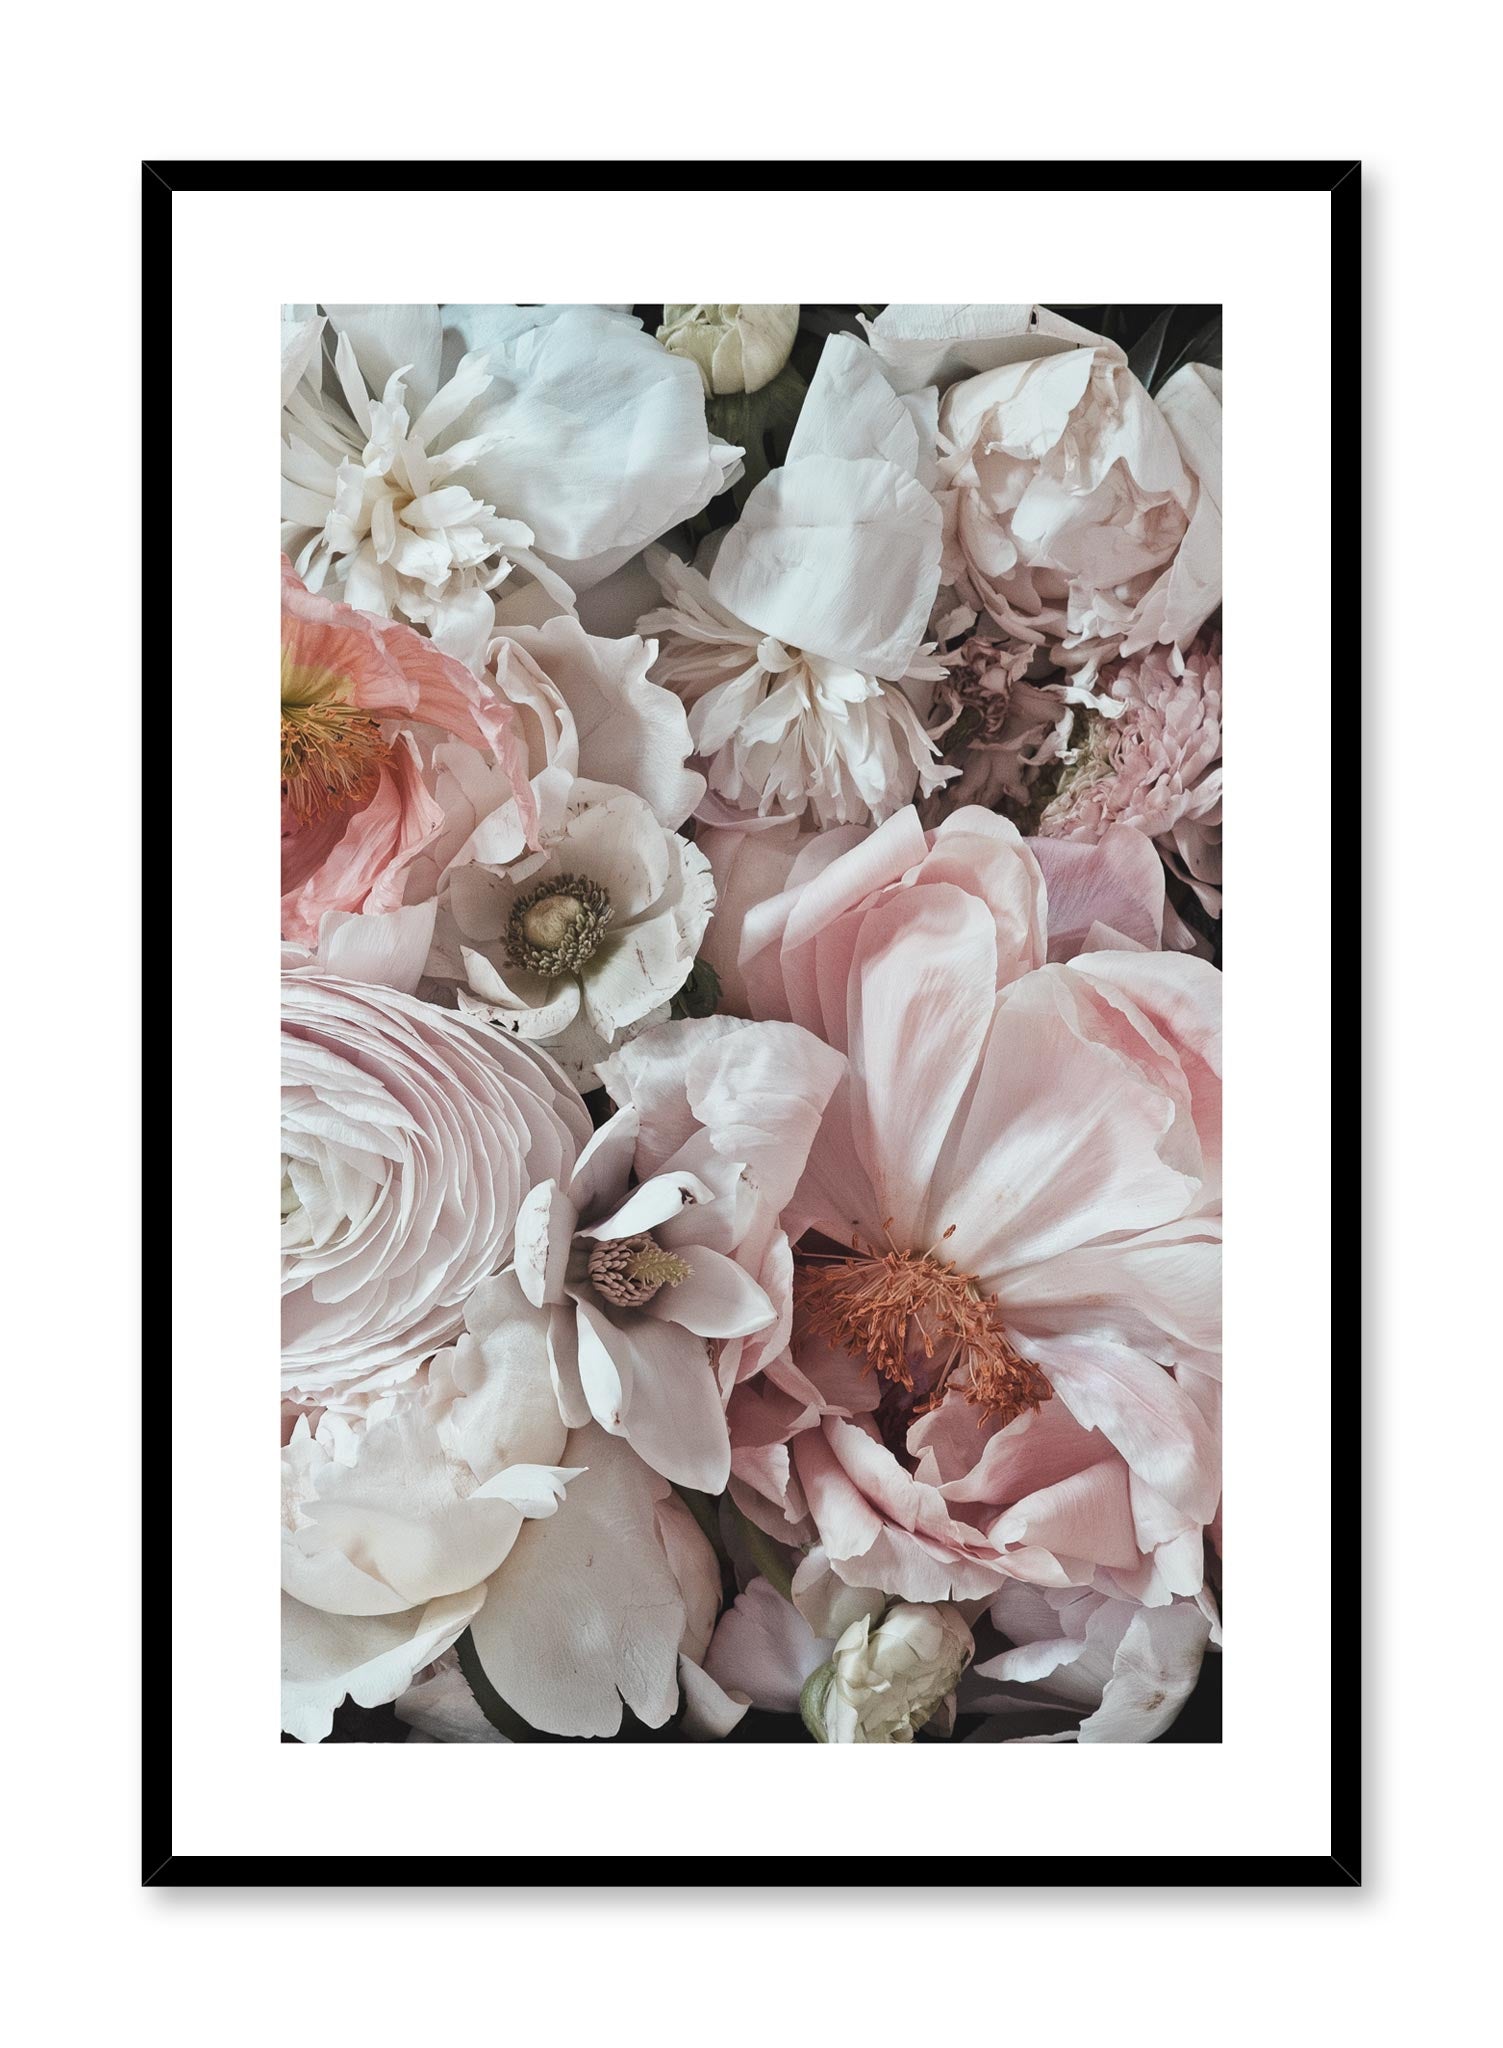 Minimalist design floral photography poster of Petals by Love Warriors Creative Studio - Buy at Opposite Wall